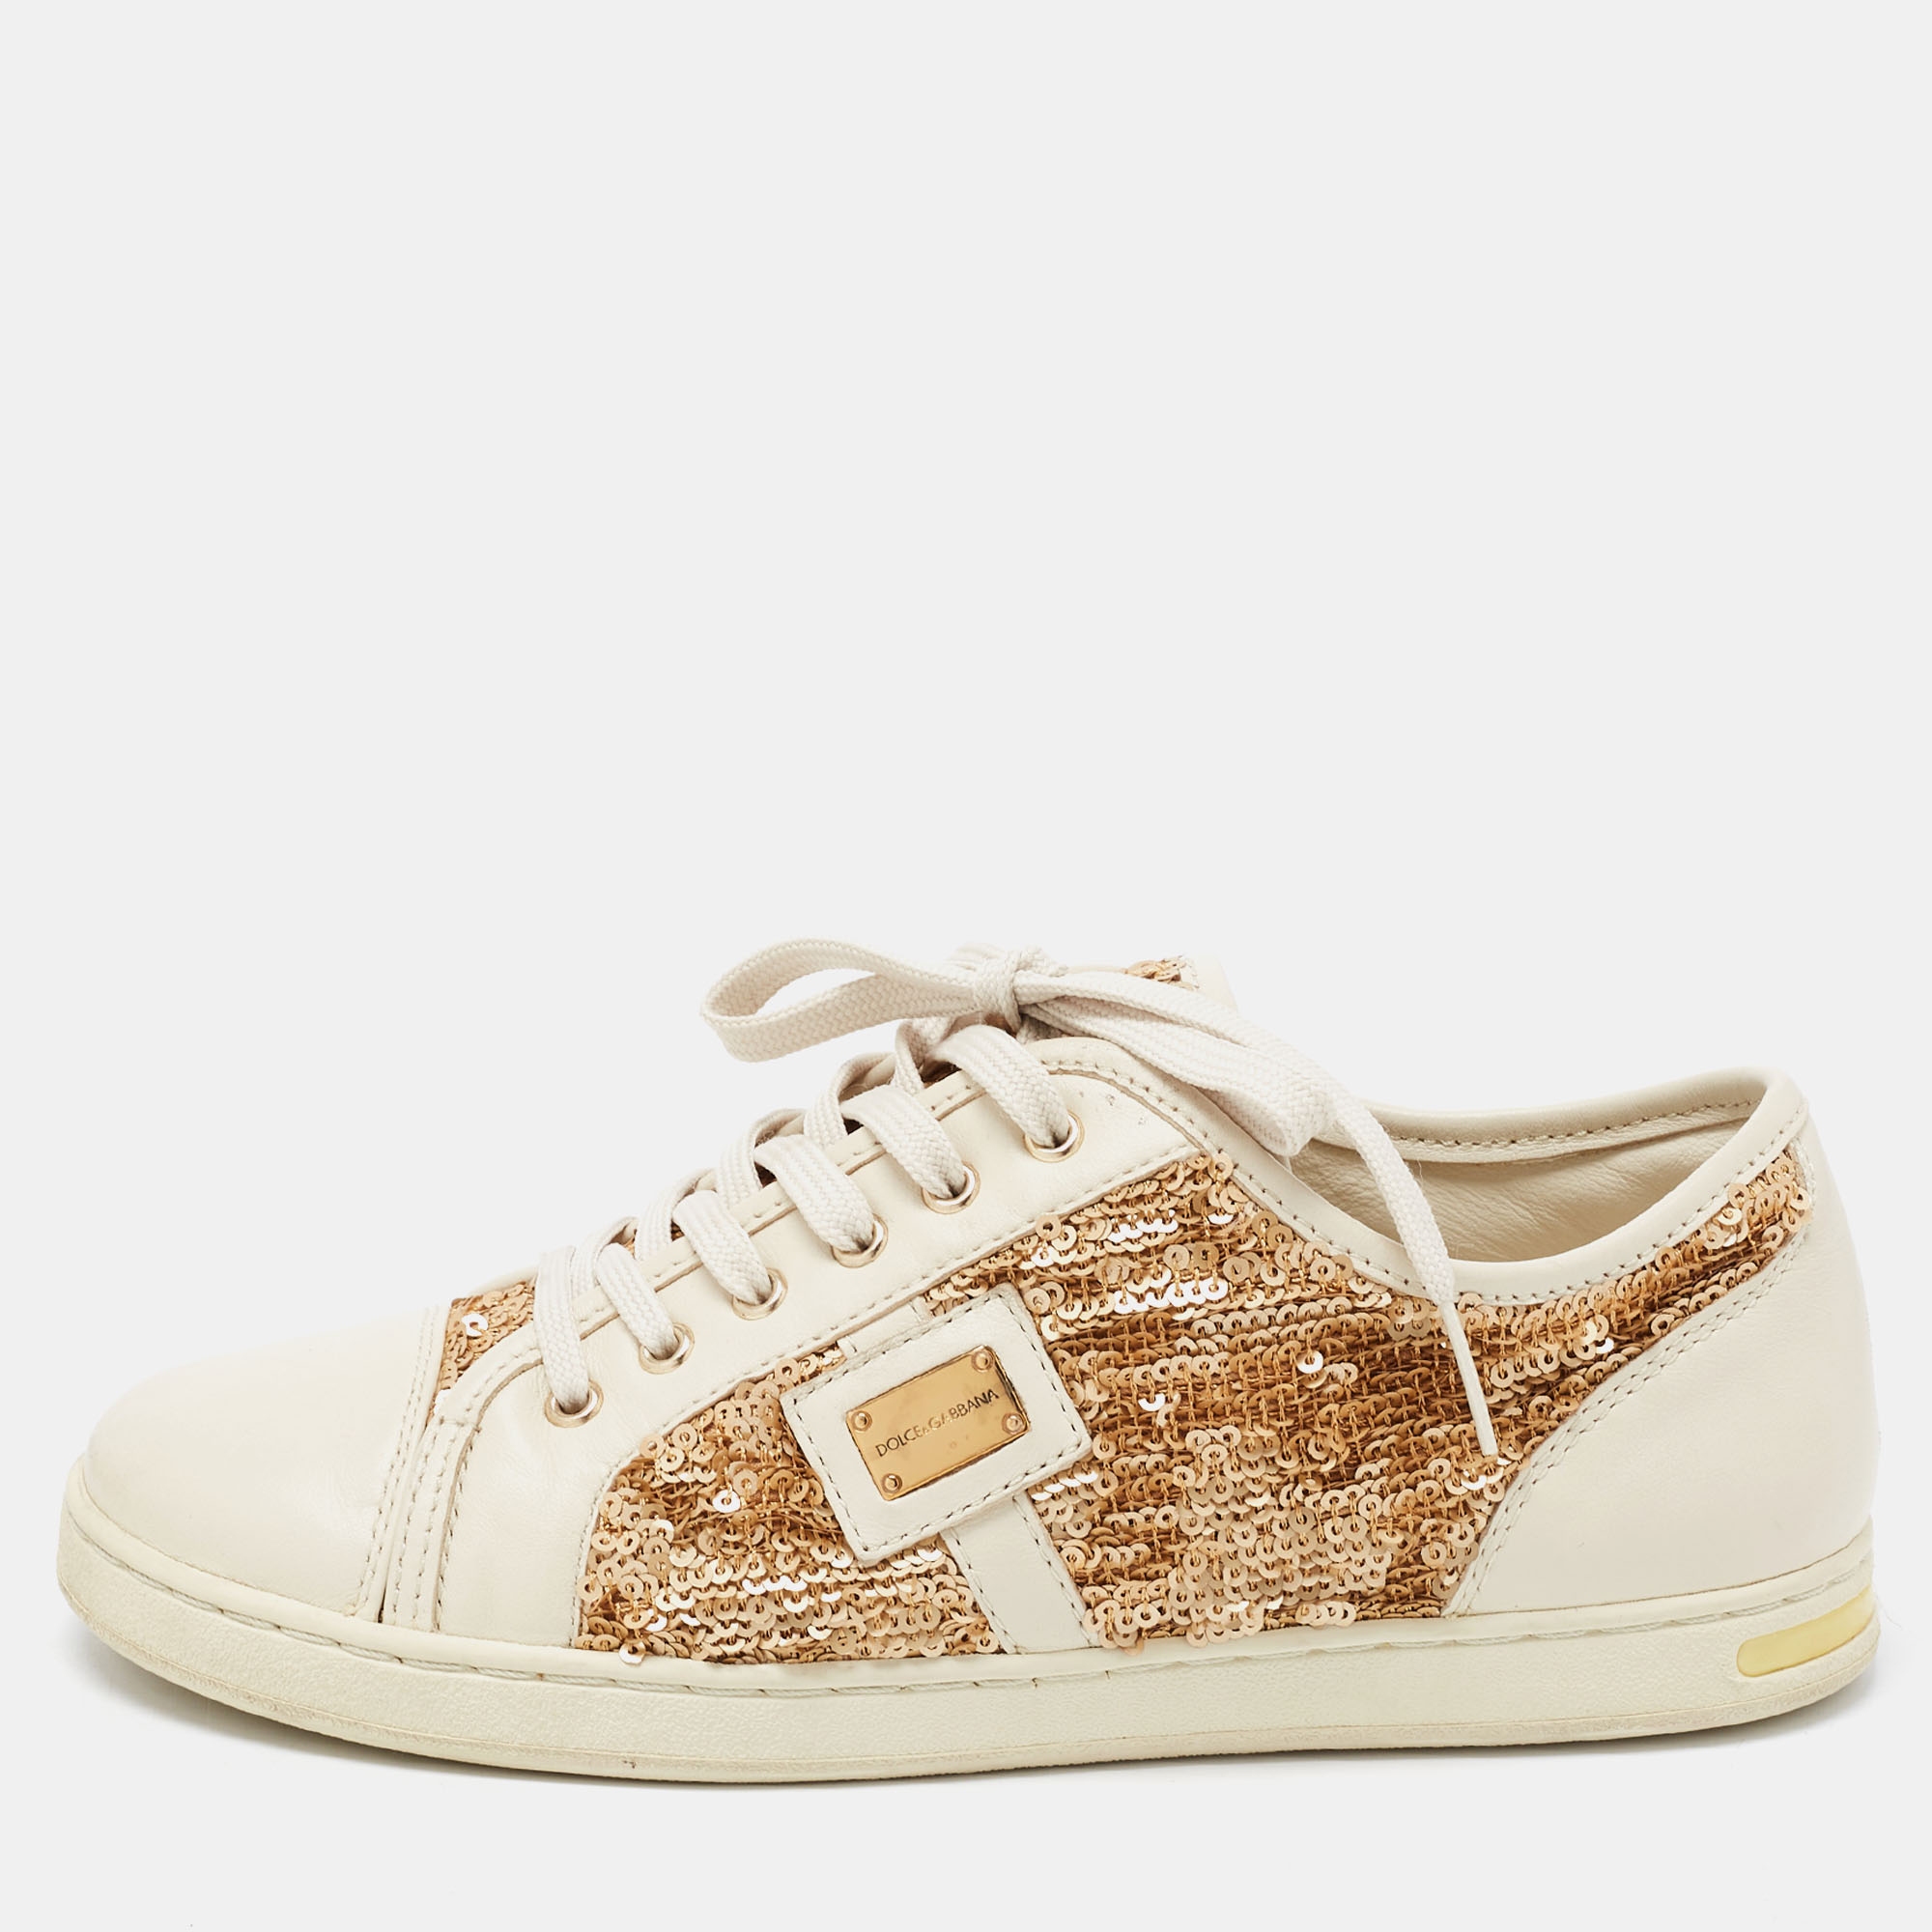 

Dolce & Gabbana Cream Leather and Sequin Embellished Low Top Sneakers Size